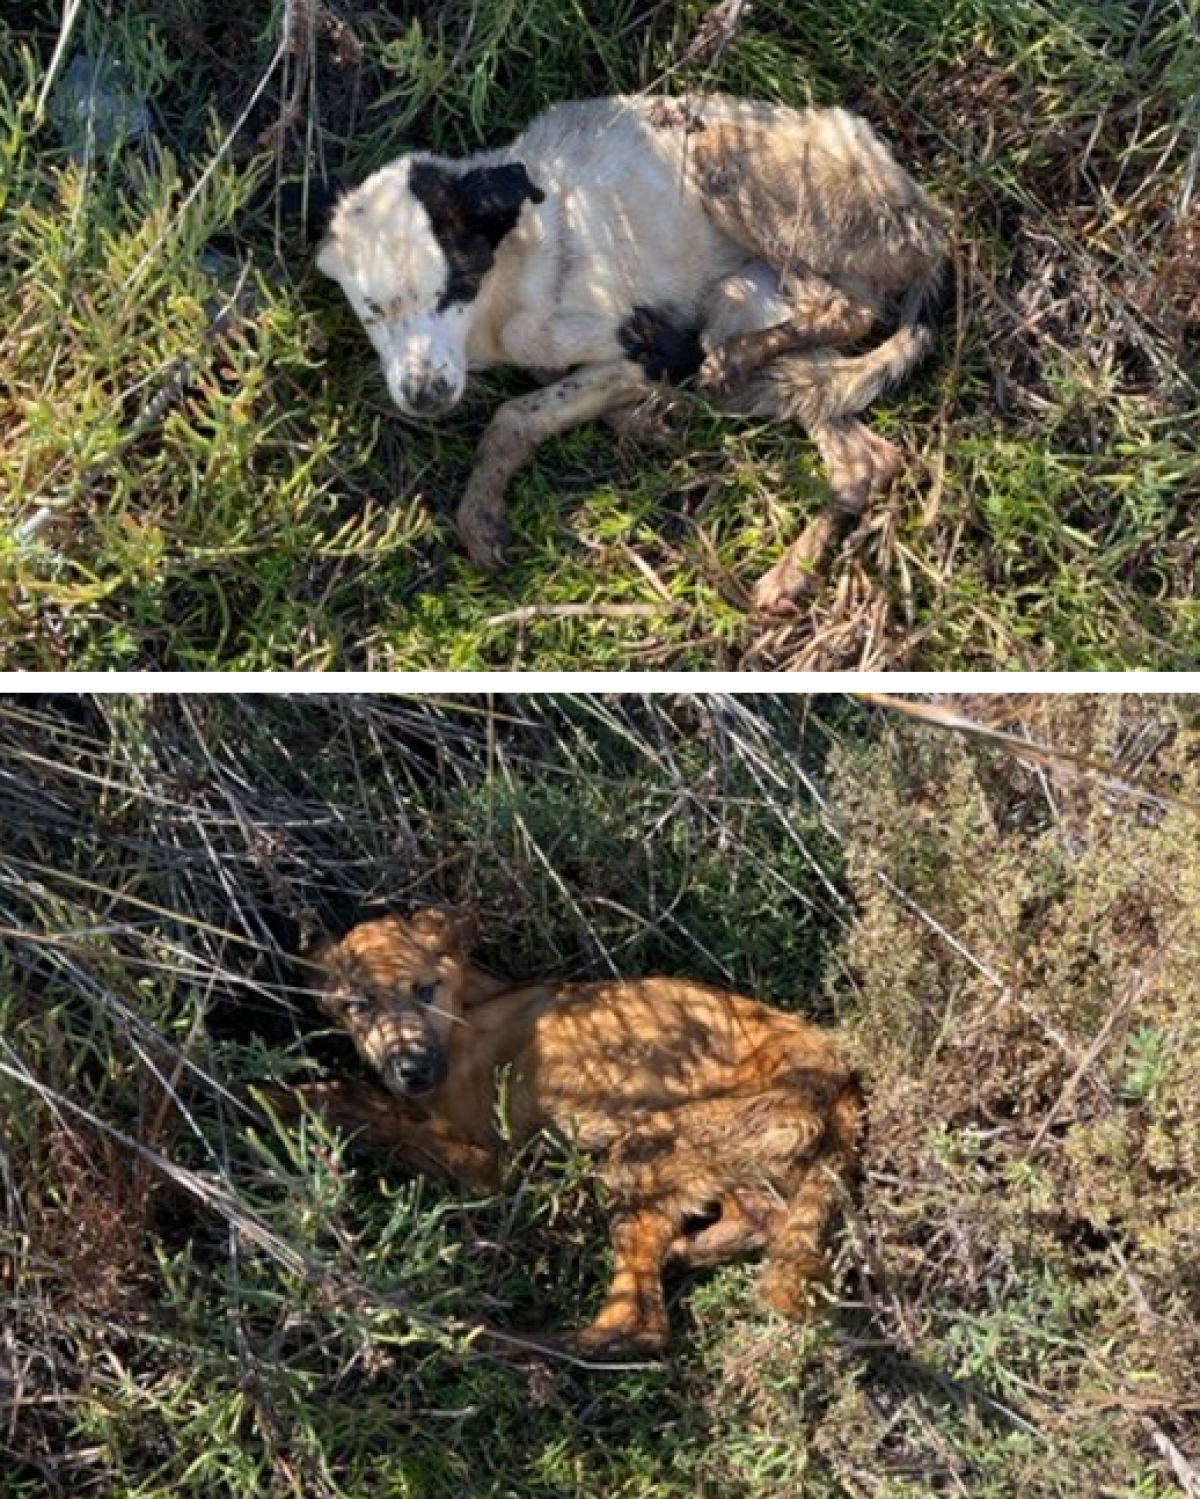 Two emaciated dogs found at Buena Vista Lagoon in Oceanside on Oct. 18.